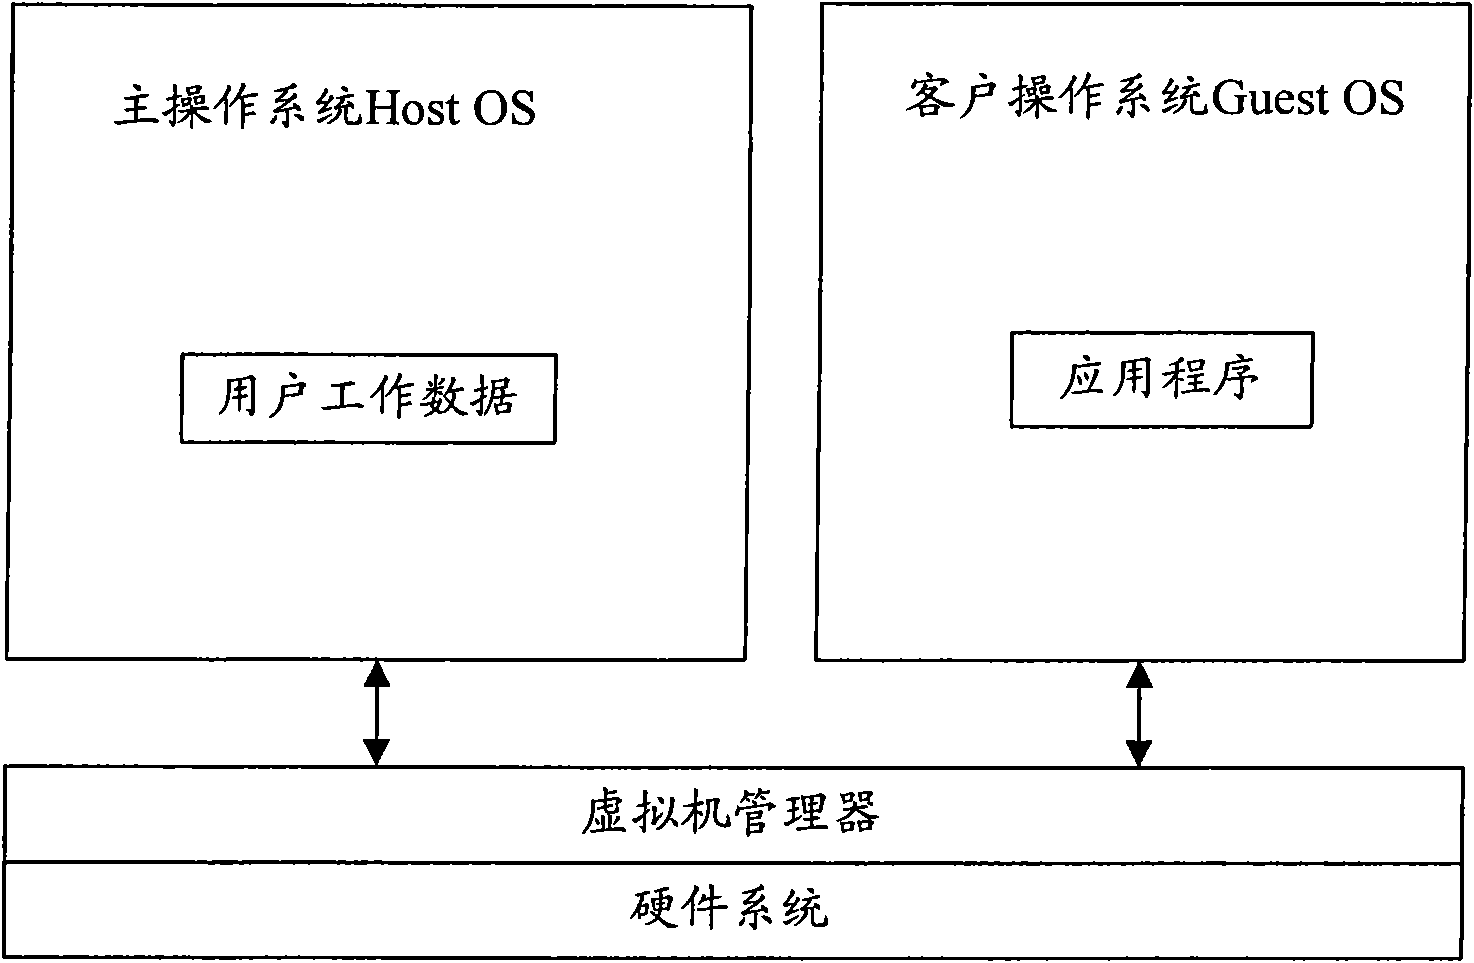 Method for deployment and operation of application in computer and virtual machine environments